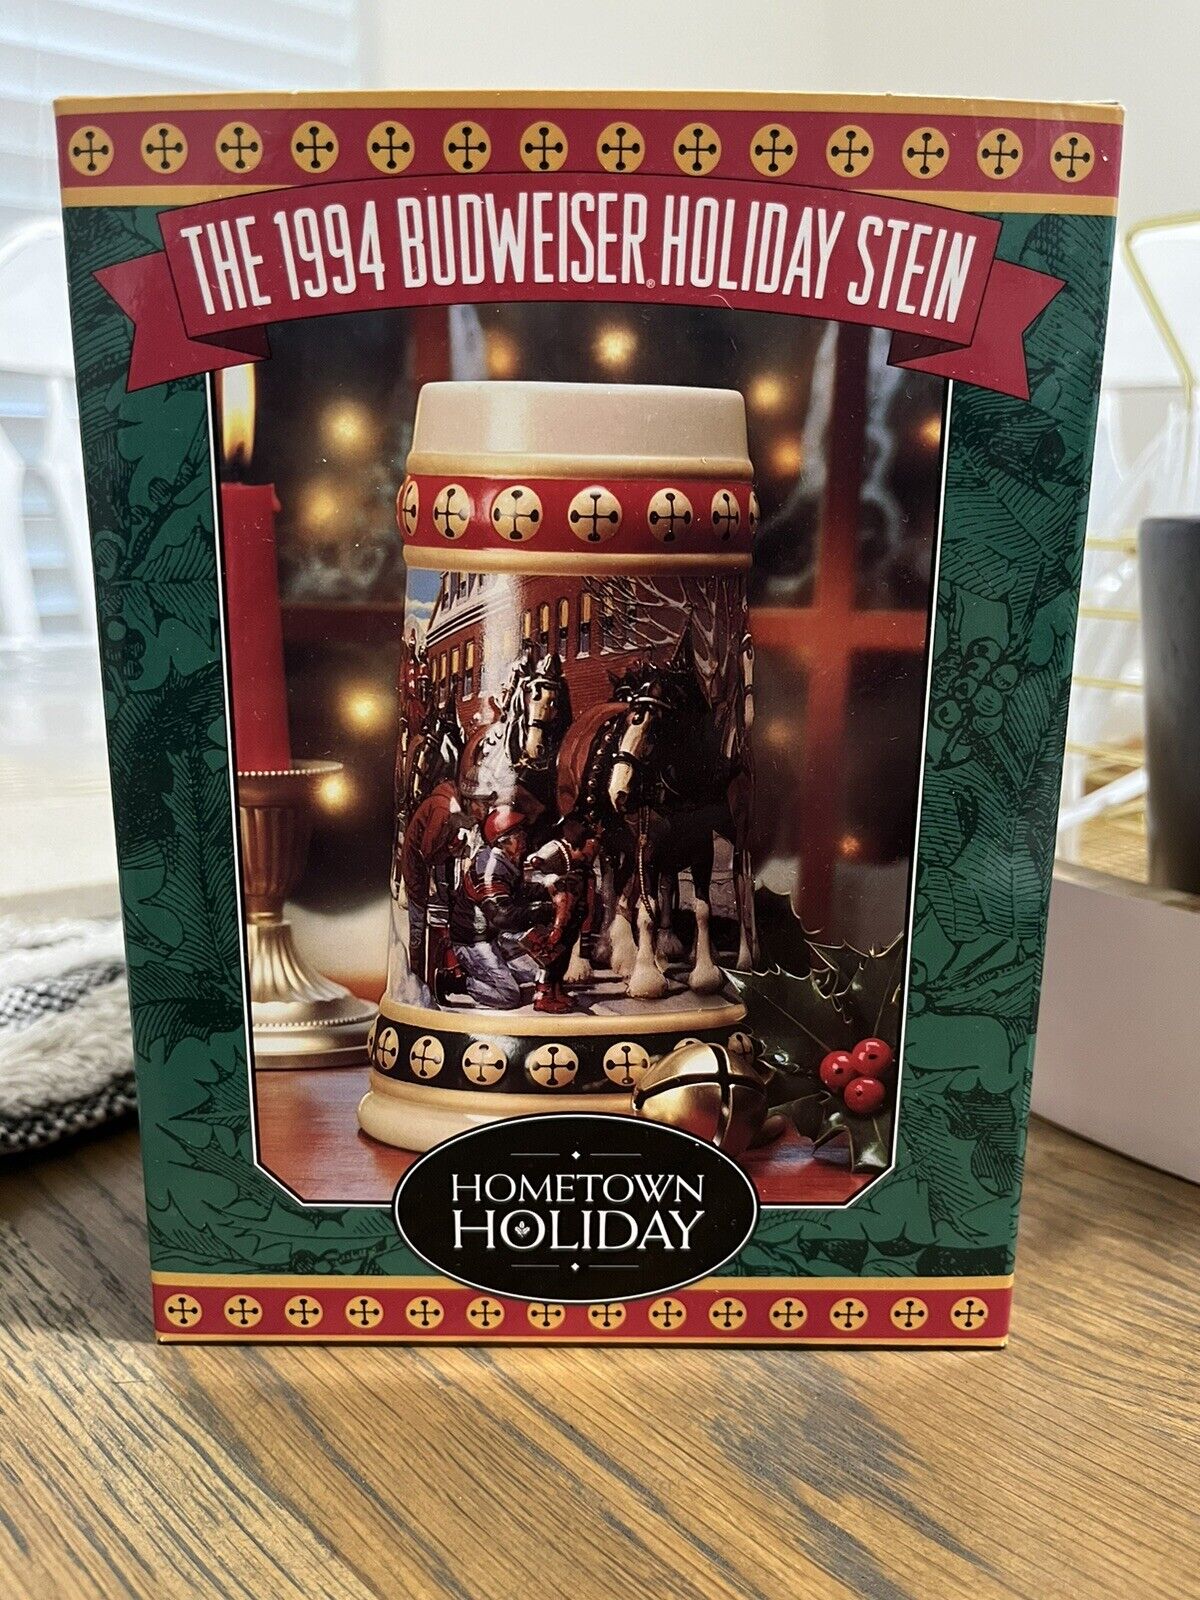 **NIB** The 1994 Budweiser Holiday Stein (HOMETOWN HOLIDAY)  **COA Included**